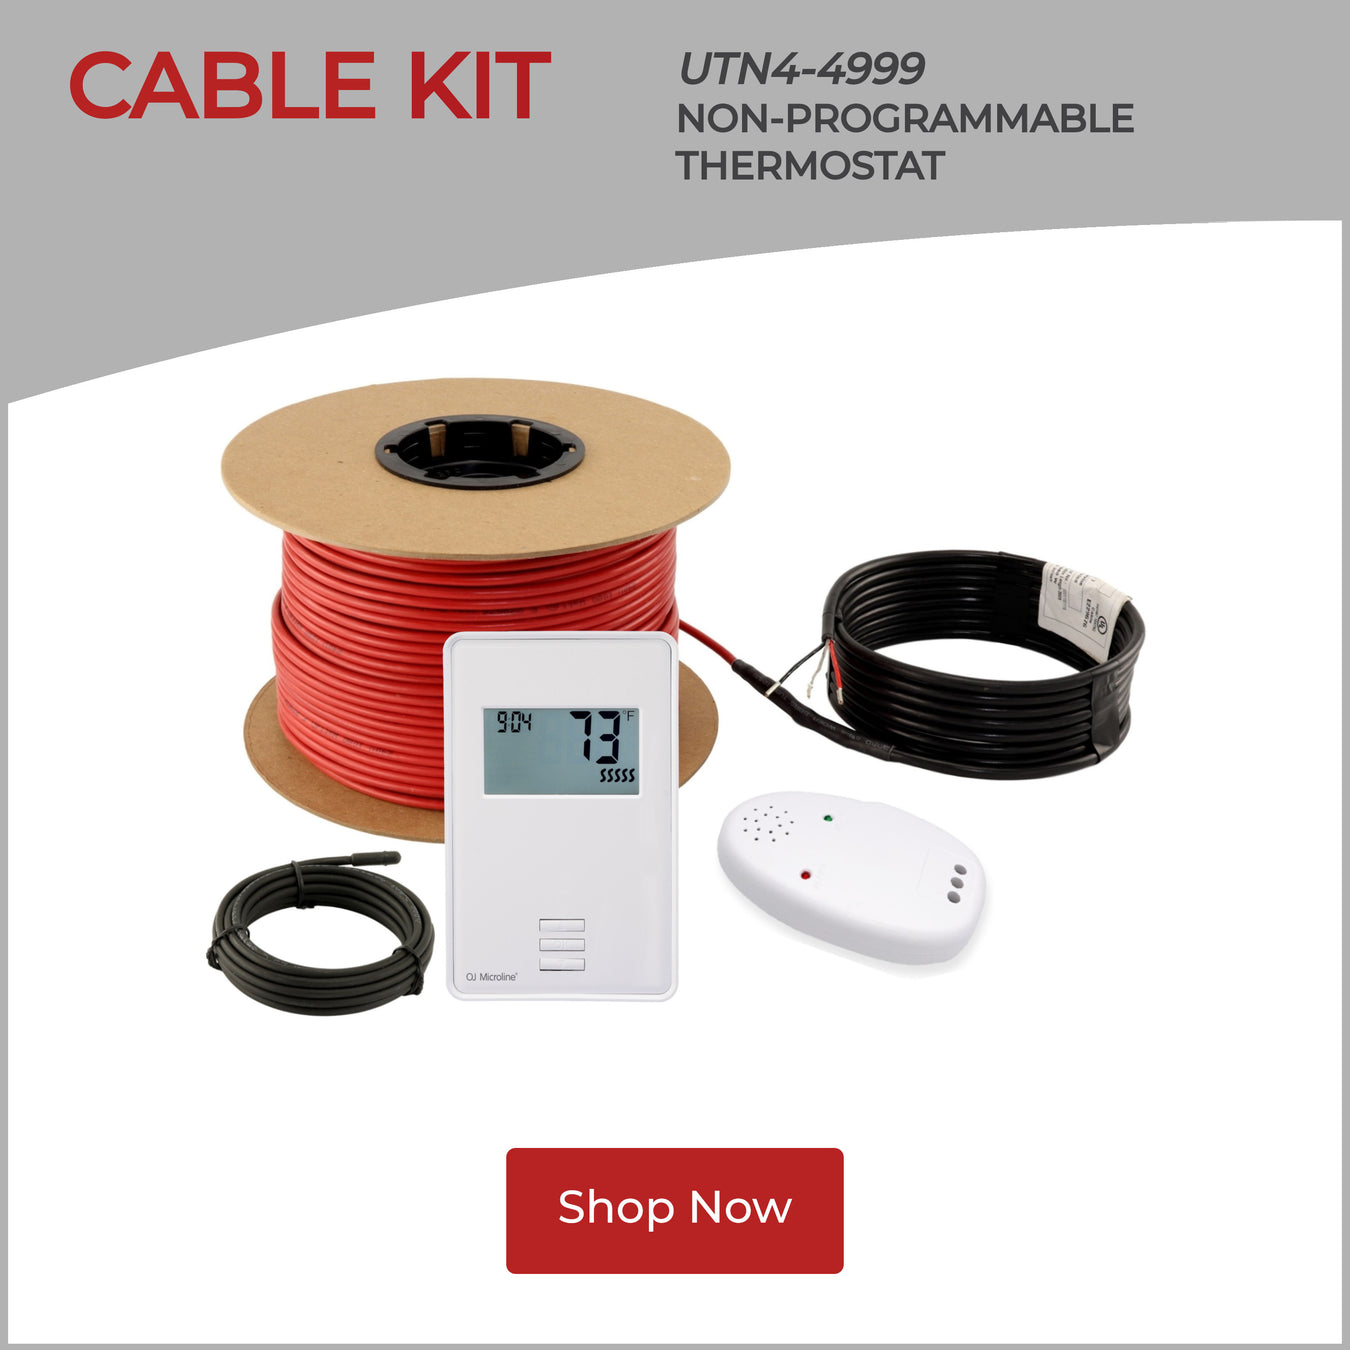 Overview_-_Cable_Kit_with_UTN4